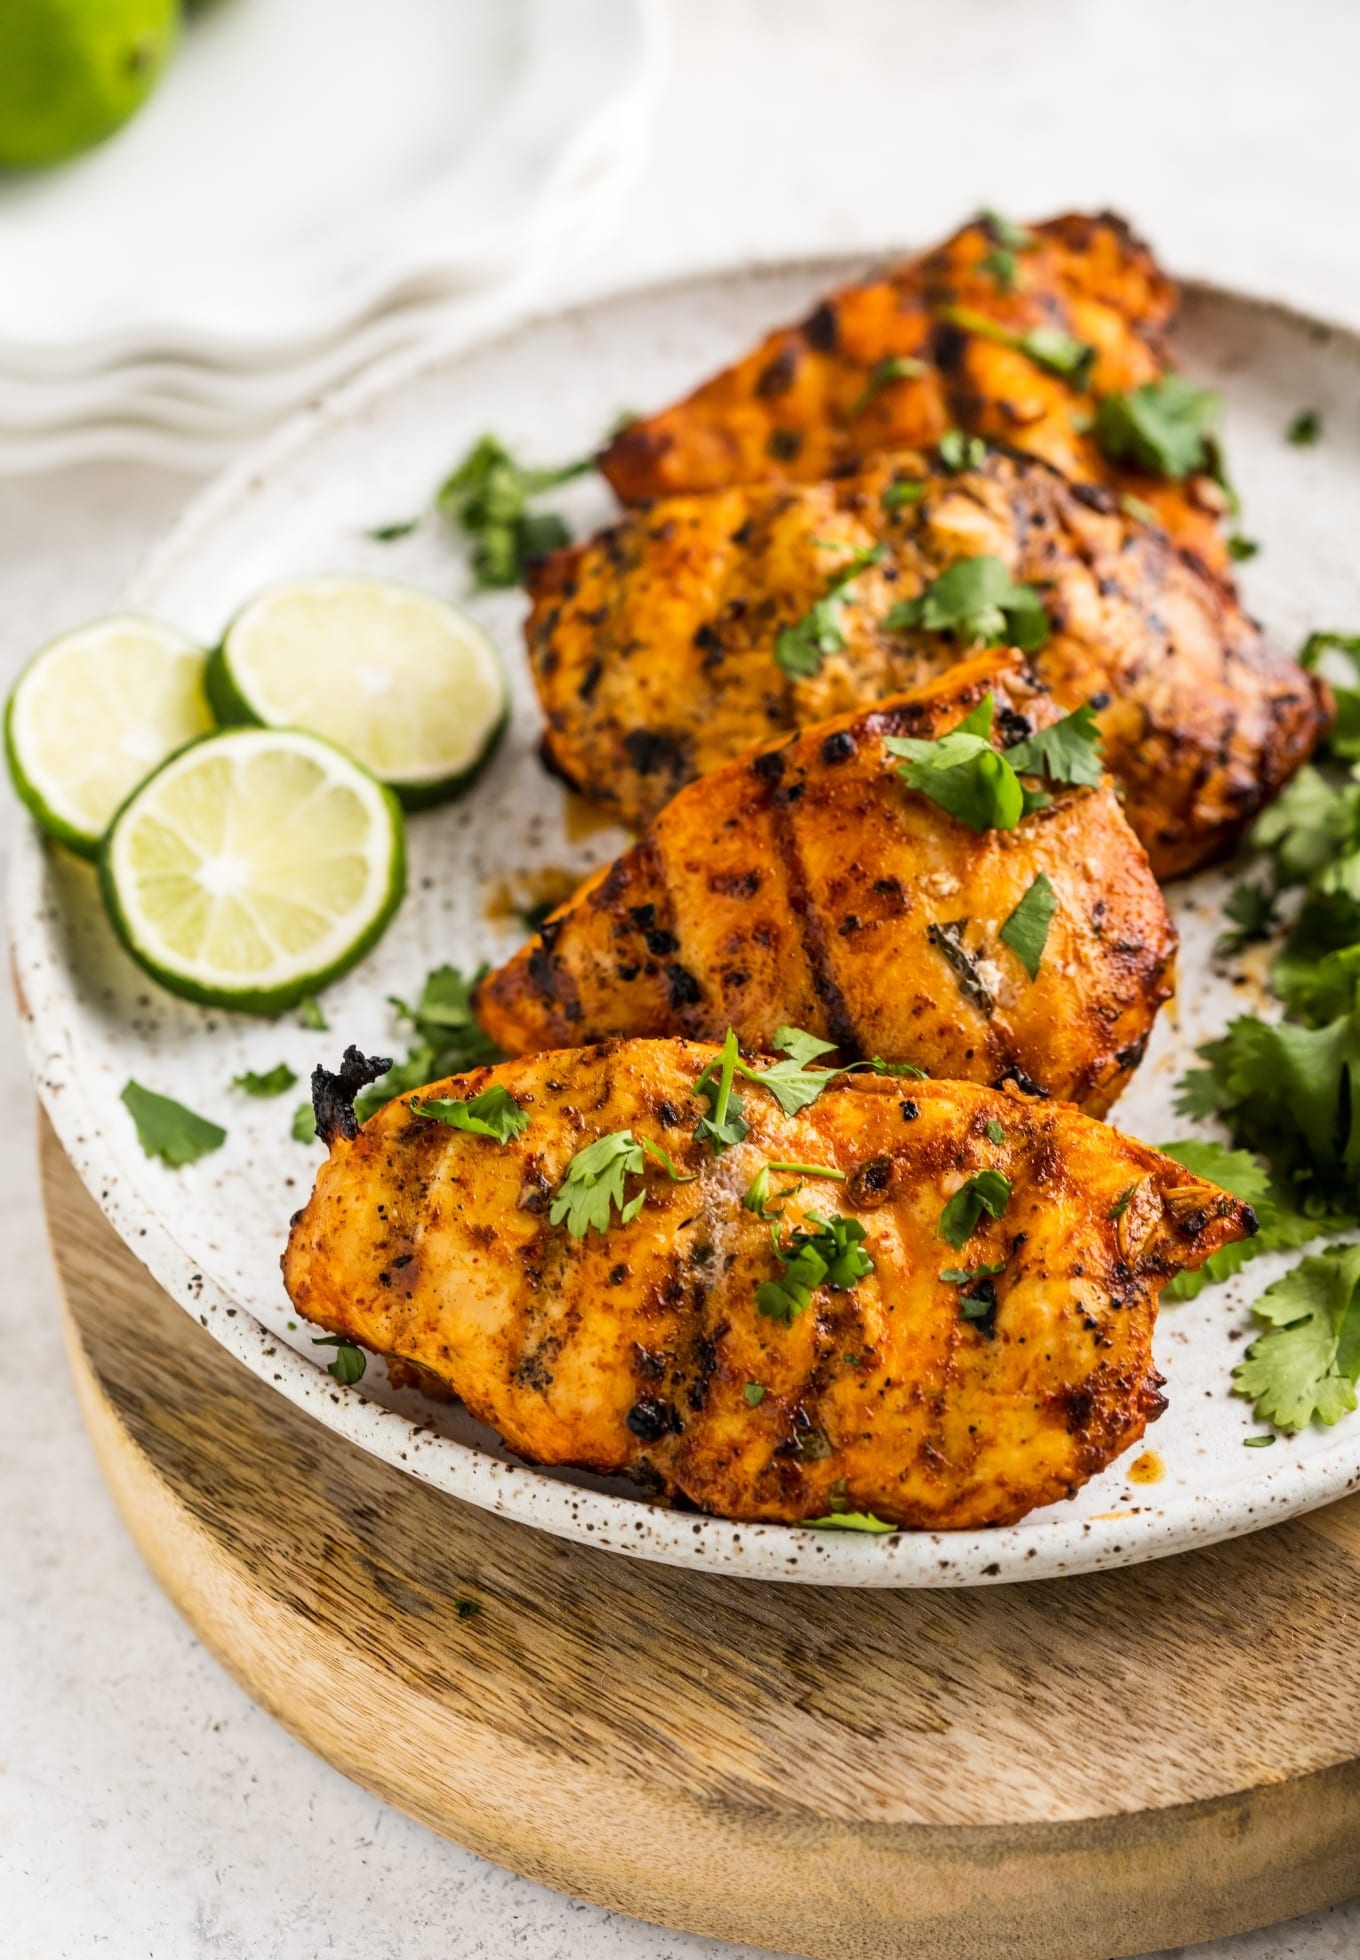 https://thewholecook.com/wp-content/uploads/2021/06/Chipotle-Lime-Grilled-Chicken-by-The-Whole-Cook-vertical1.jpg